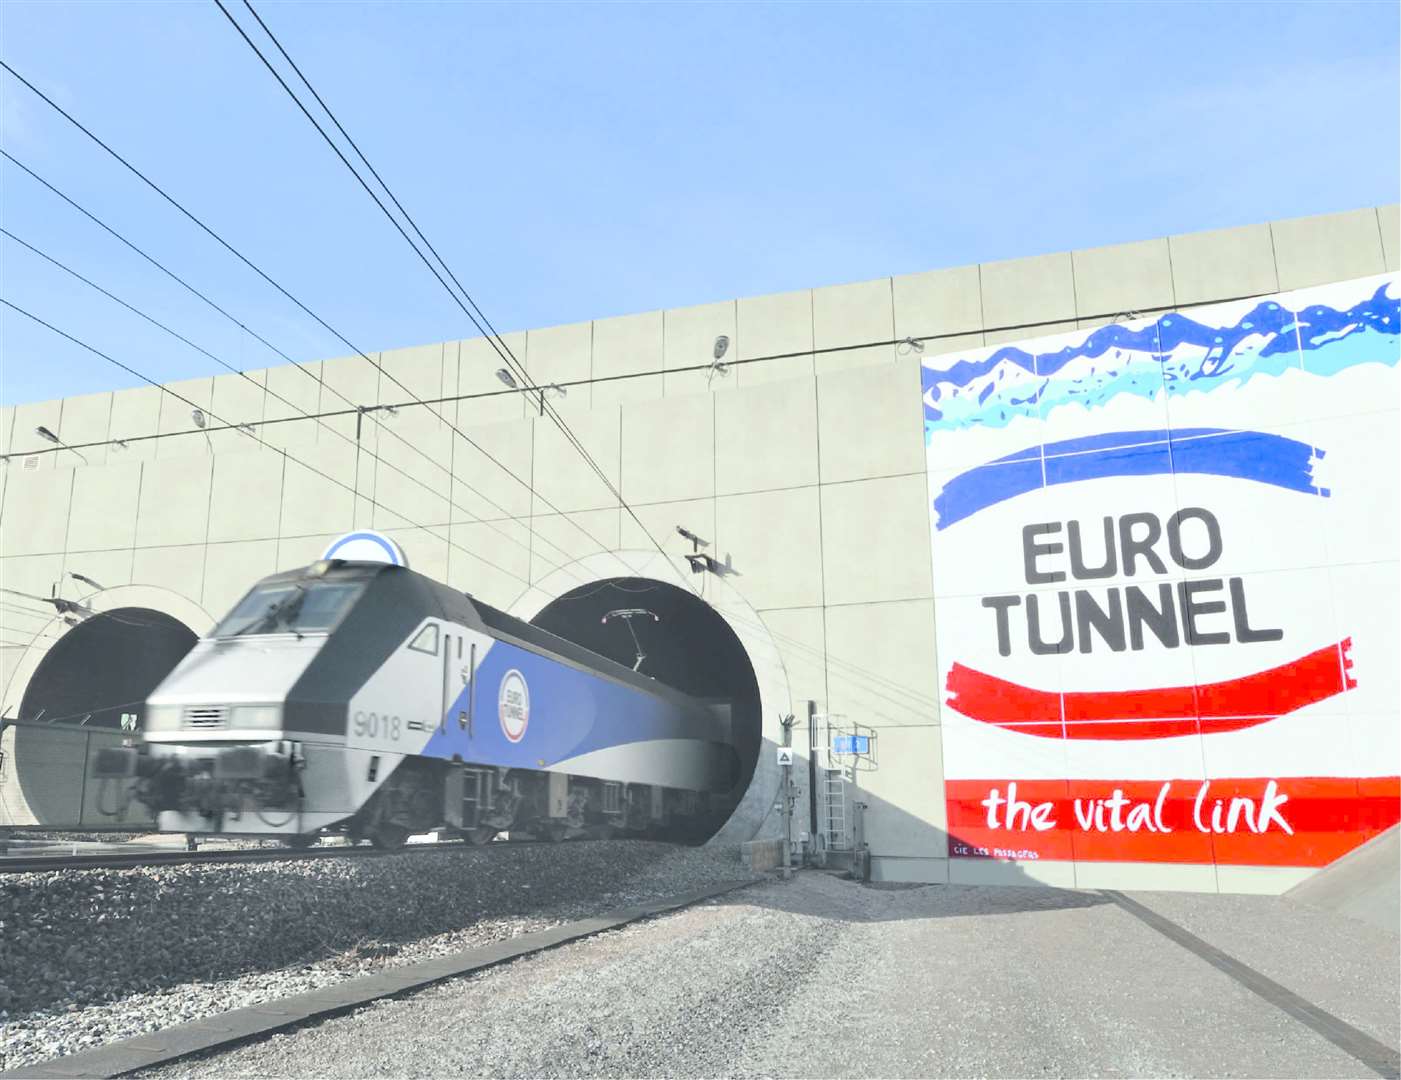 Eurotunnel's financial figures for 2019 will see dividends for shareholders